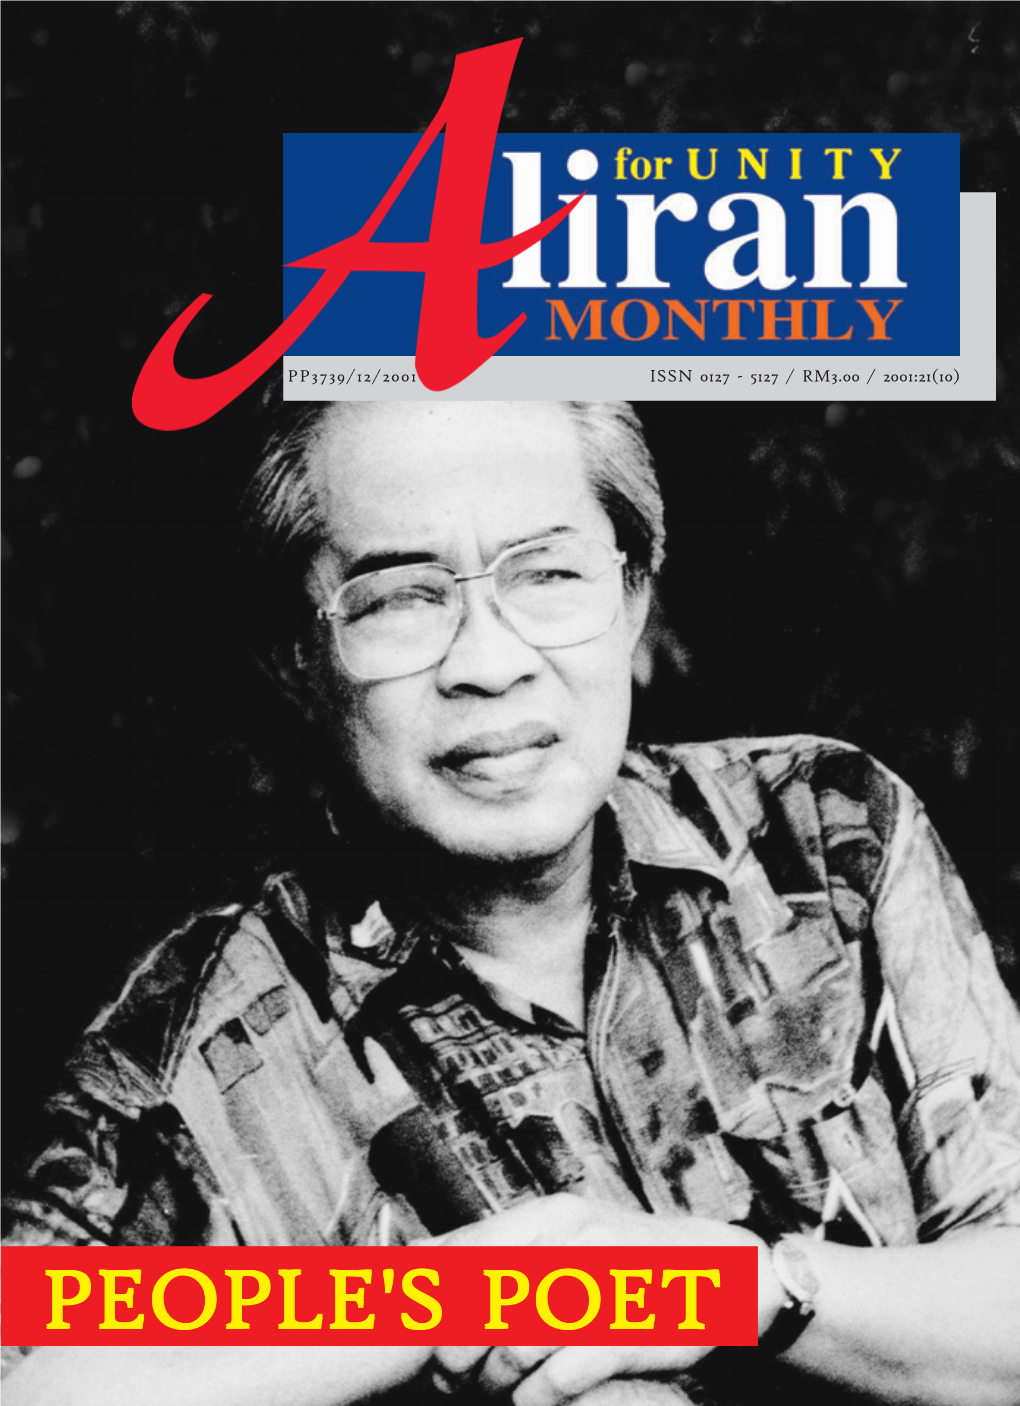 Usman Awang (1929-2001) the People's Poet by Dr Syed Husin Ali